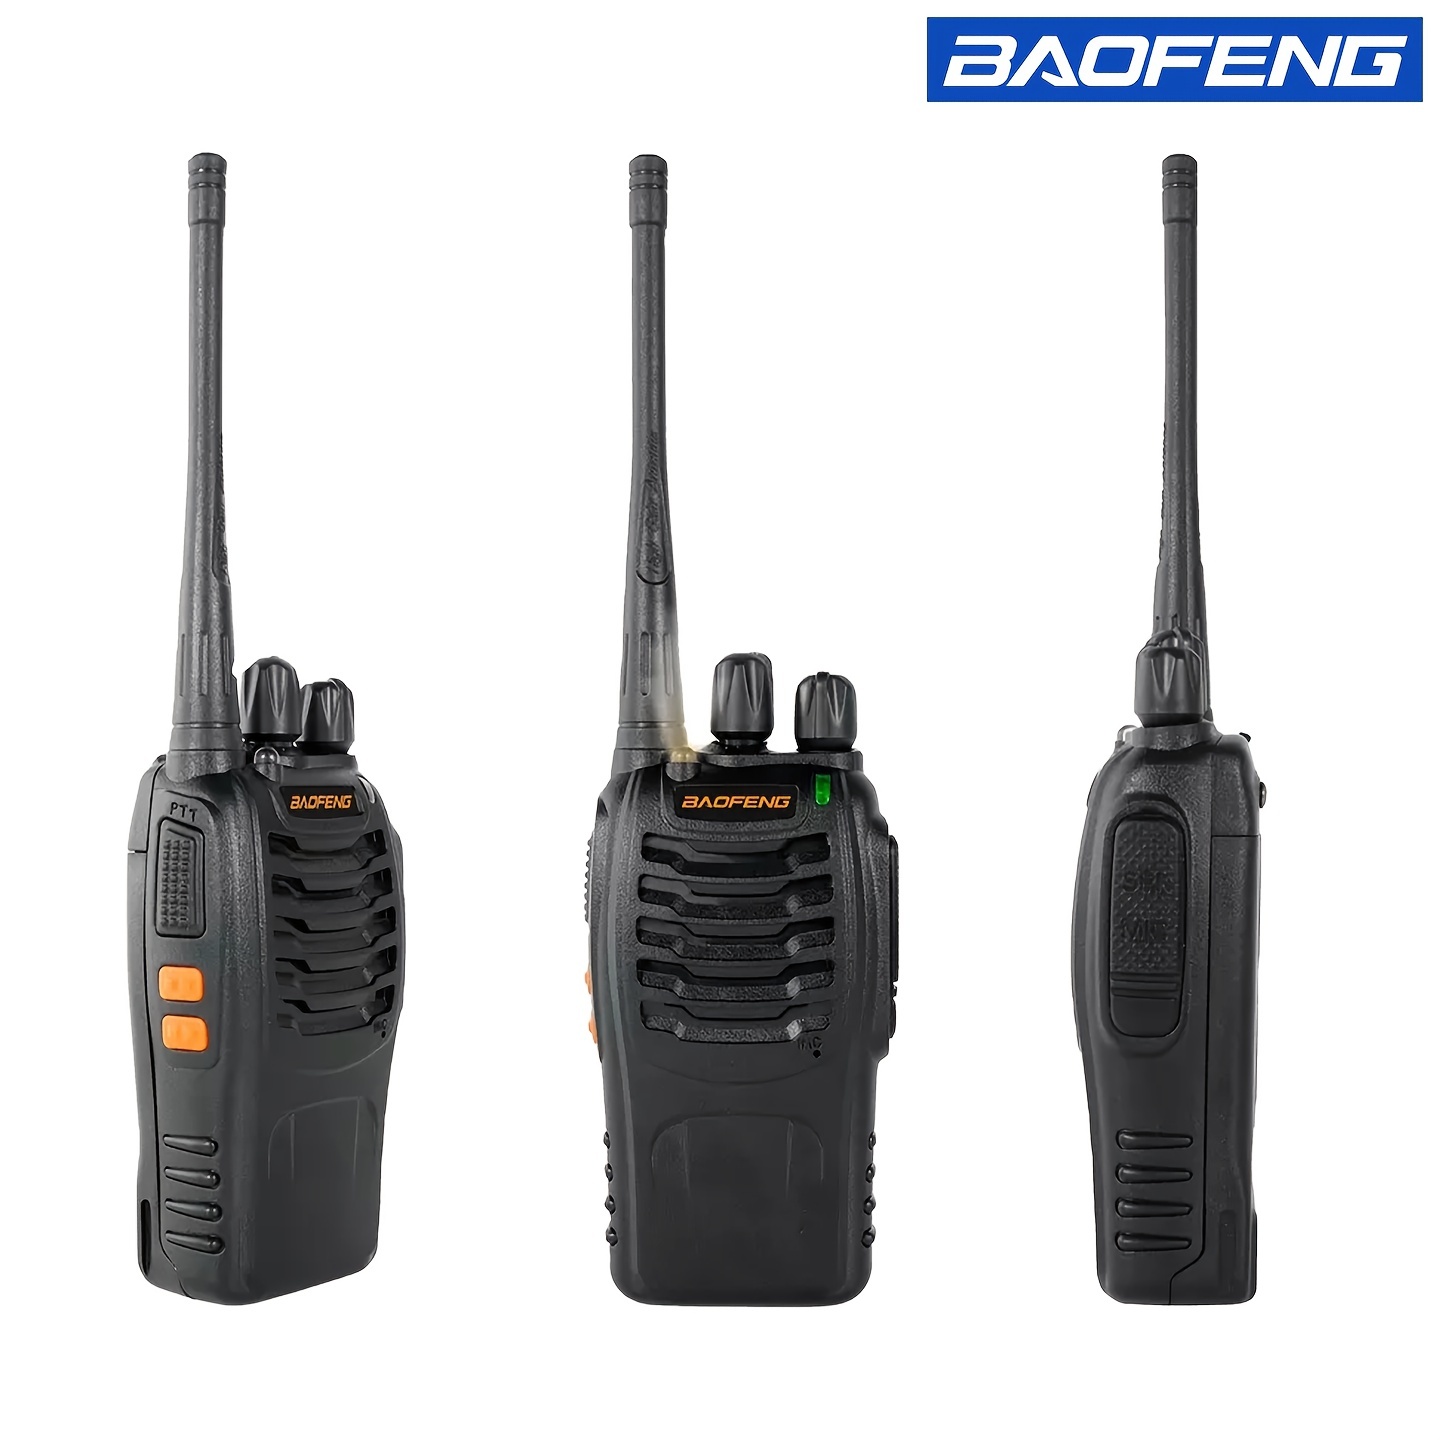 1pc Baofeng BF 888H Ham Two Way Radio Walkie Talkie: Rechargeable Battery, USB Charge, Long Range